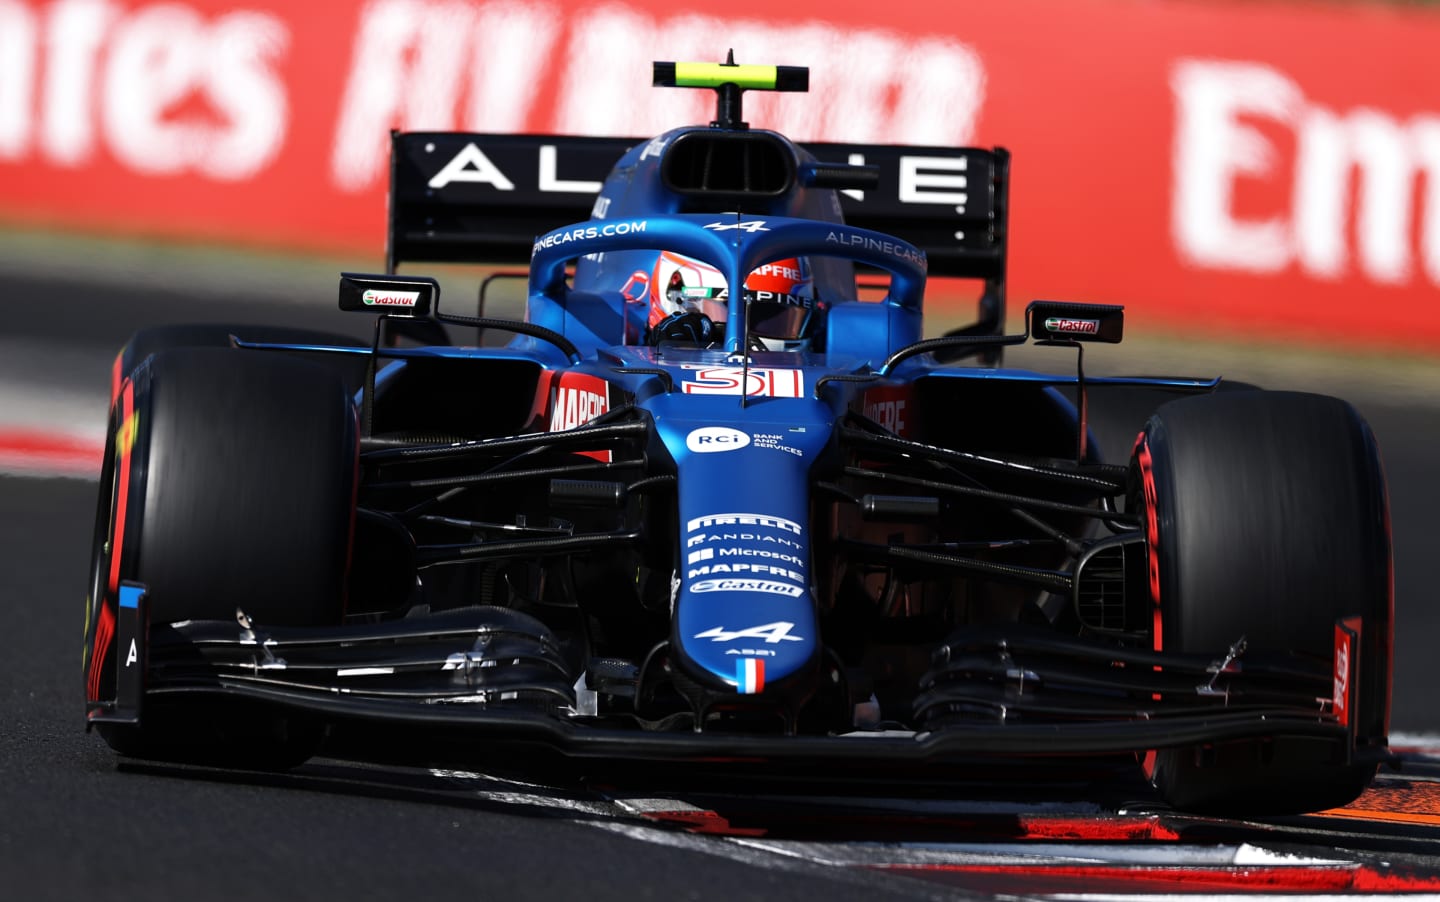 BUDAPEST, HUNGARY - JULY 31: Esteban Ocon of France driving the (31) Alpine A521 Renault during qualifying ahead of the F1 Grand Prix of Hungary at Hungaroring on July 31, 2021 in Budapest, Hungary. (Photo by Lars Baron/Getty Images)